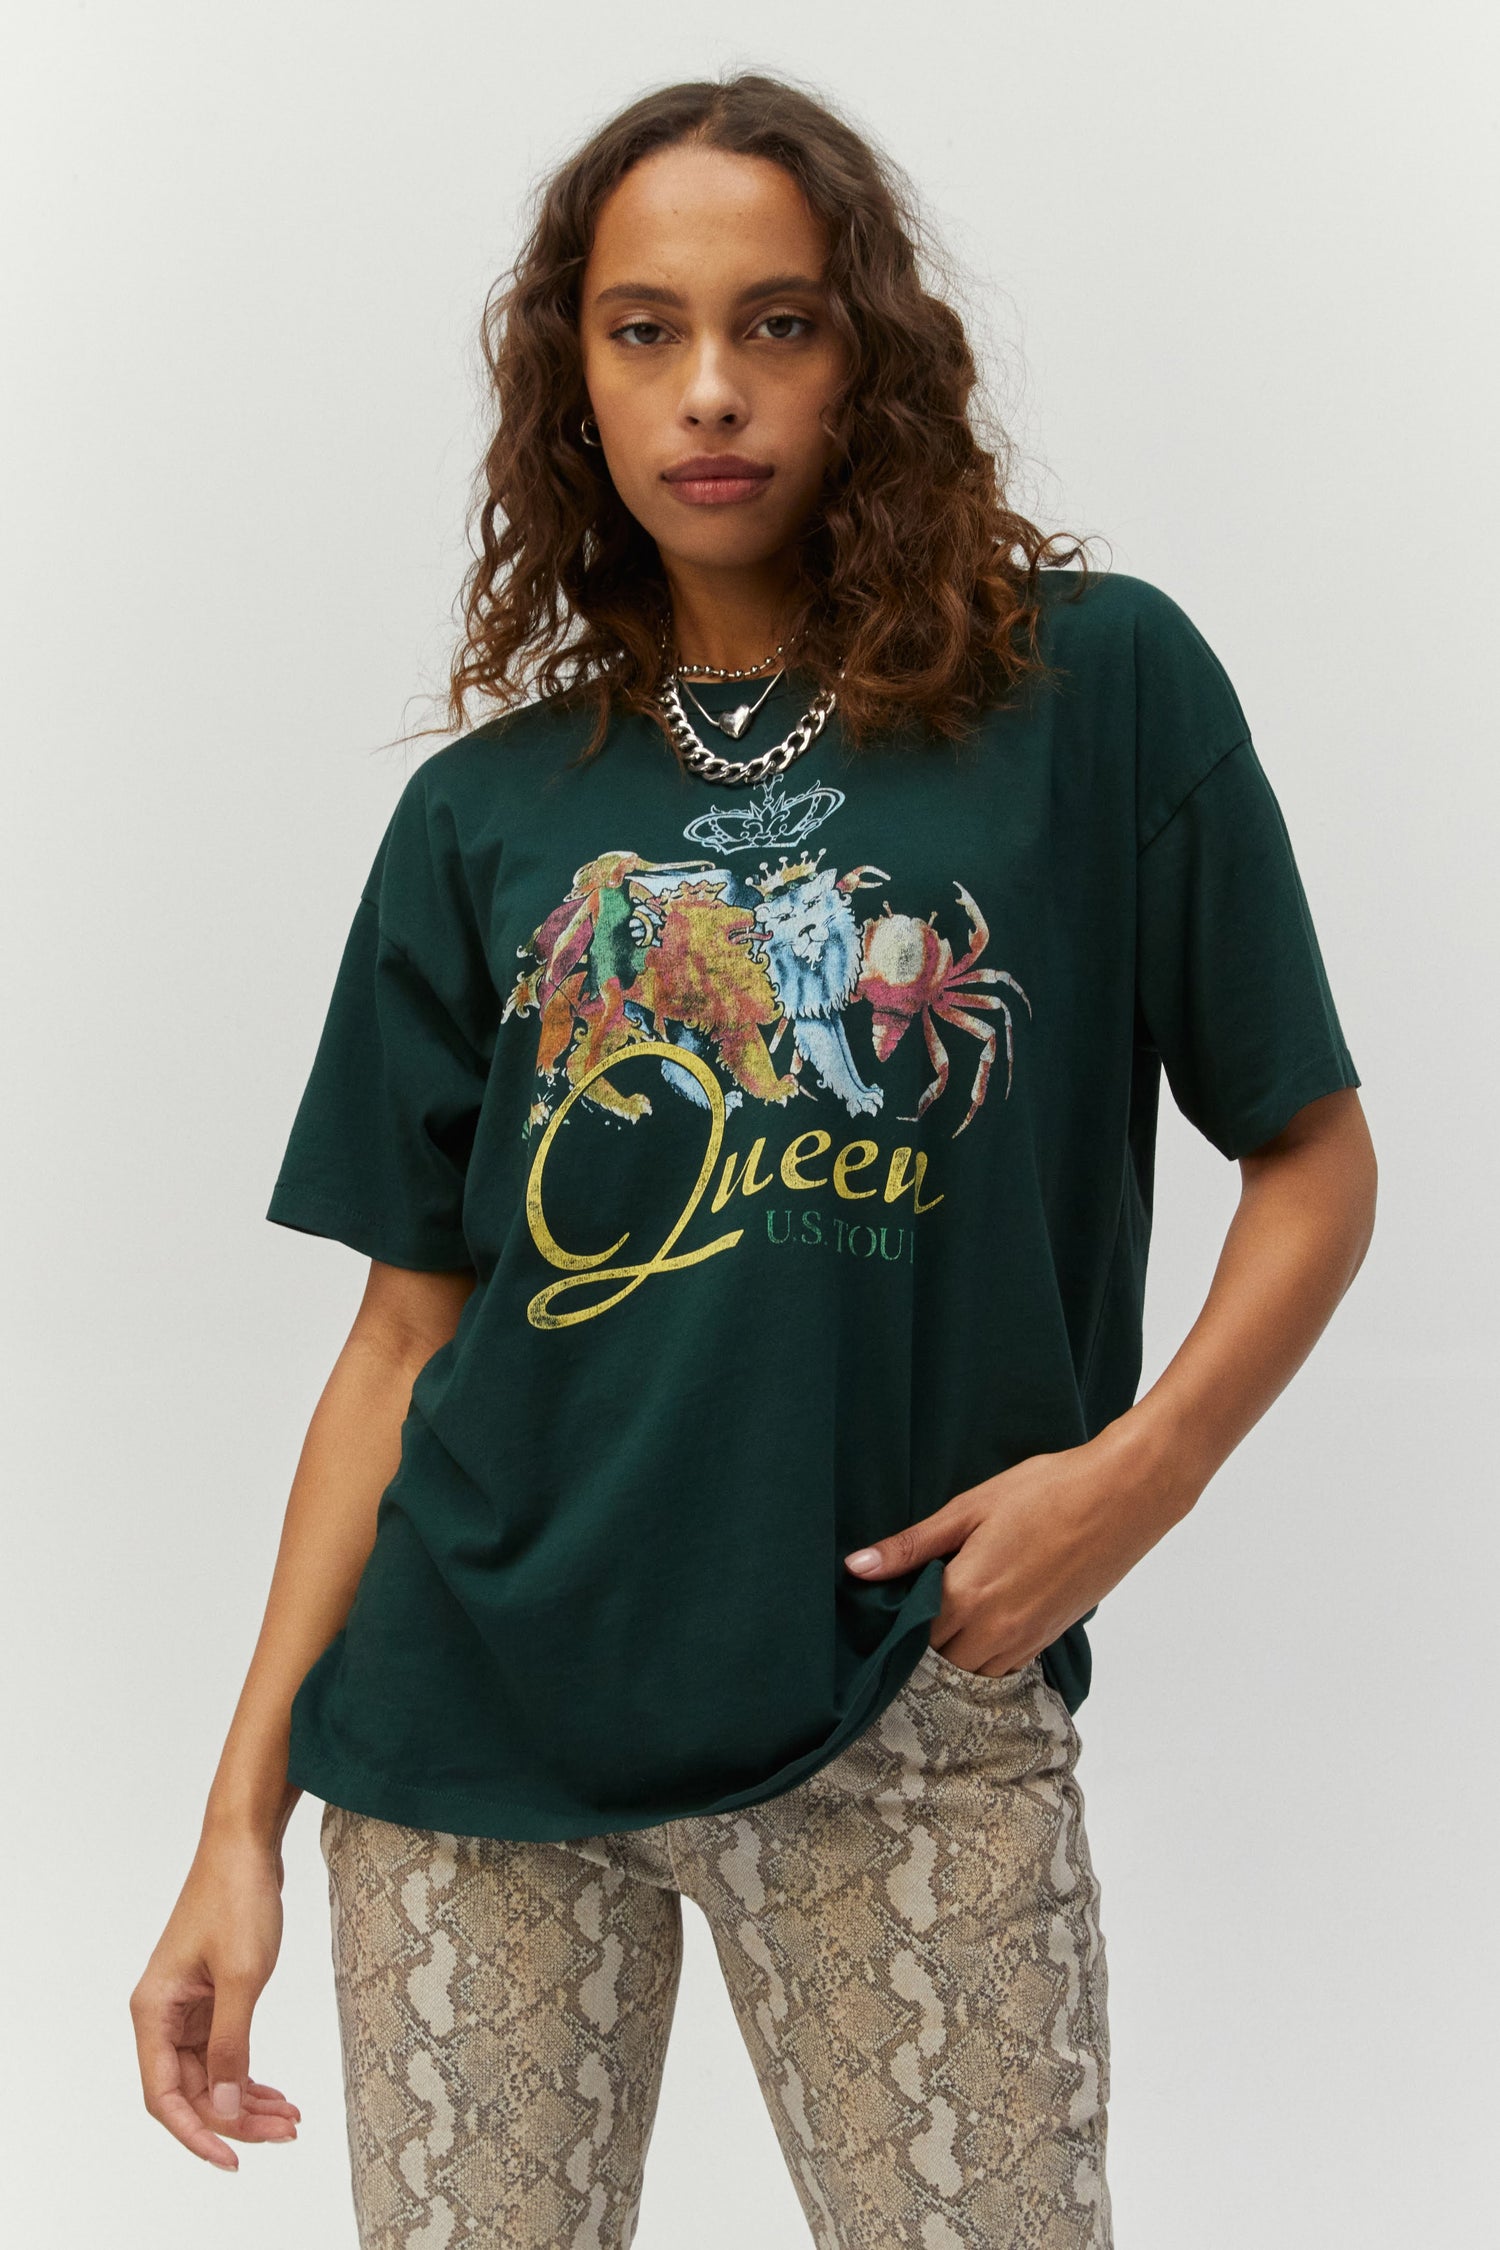 Dark curly-haired model featuring an emerald-colored tee designed with the art of royalty status, pops of color, and a slap of their logo